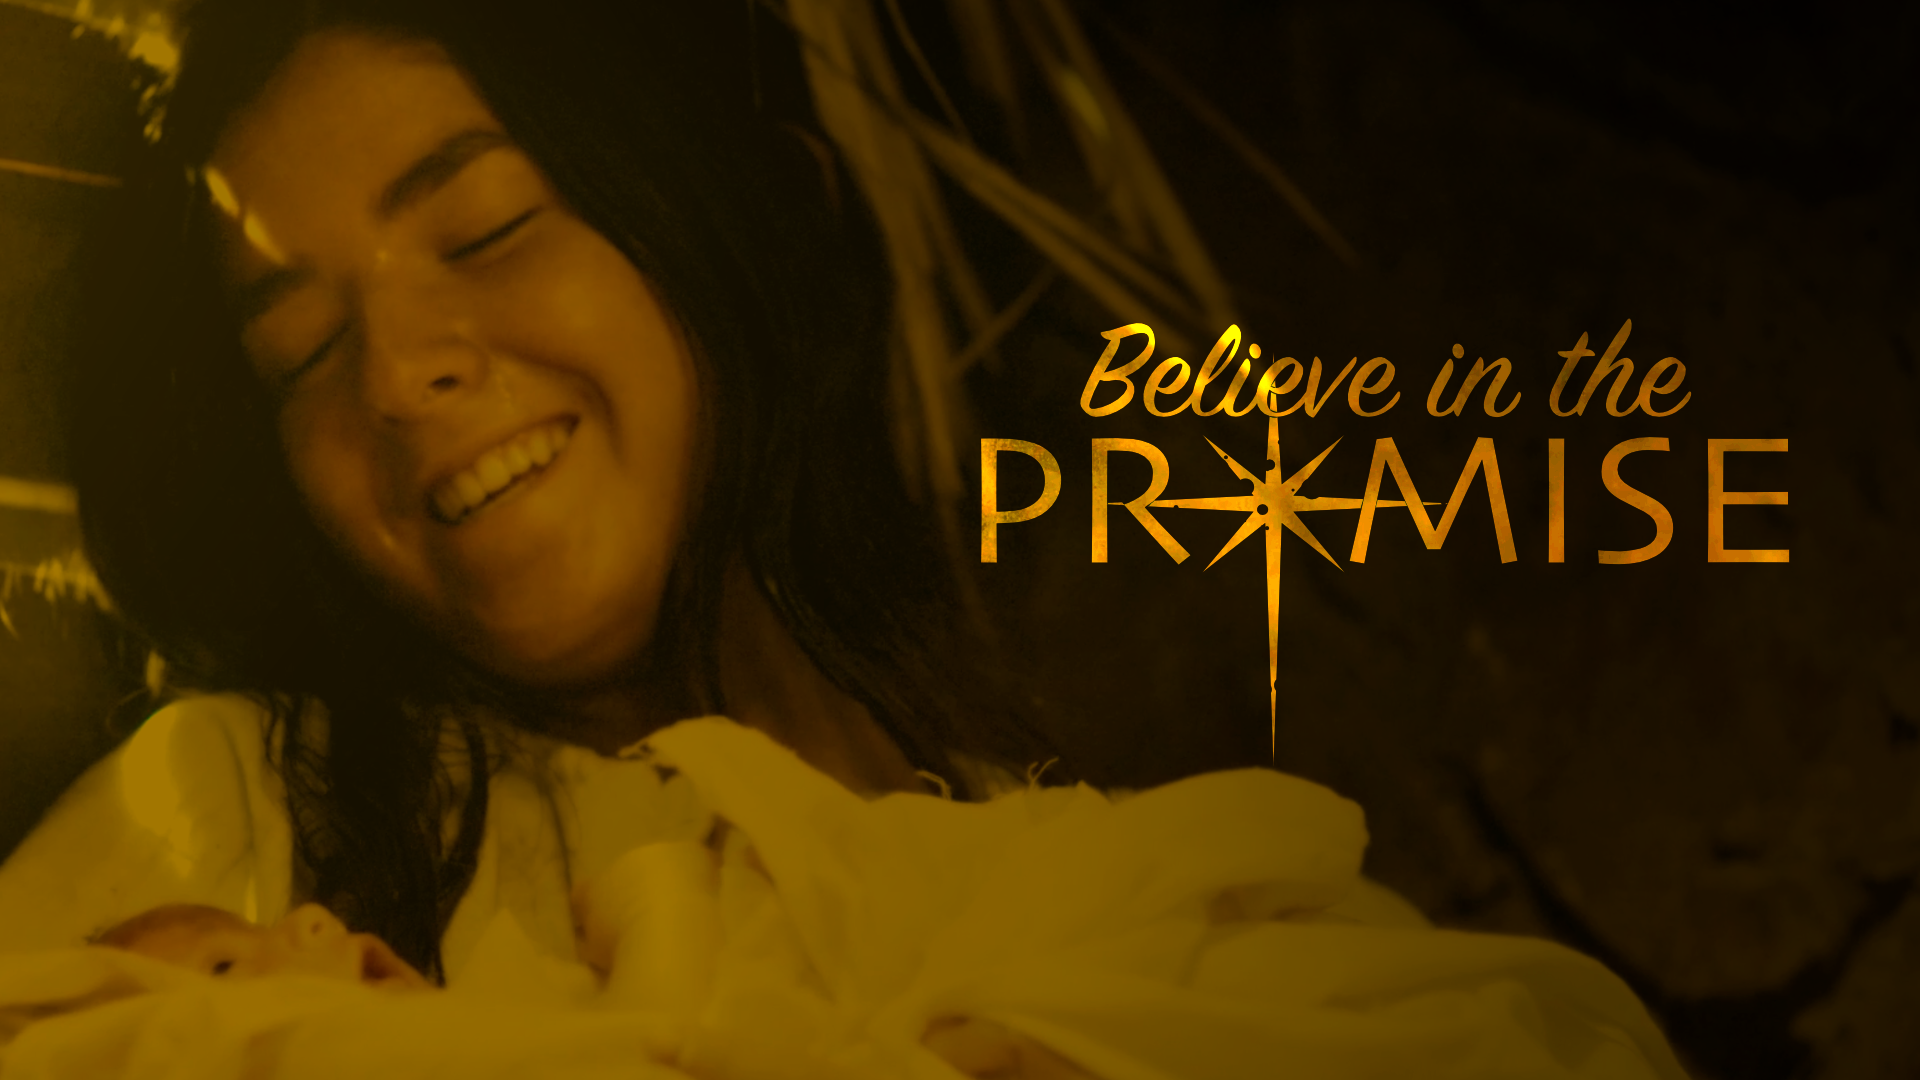 Believe In The PROMISE_2540x1440_FINAL.png